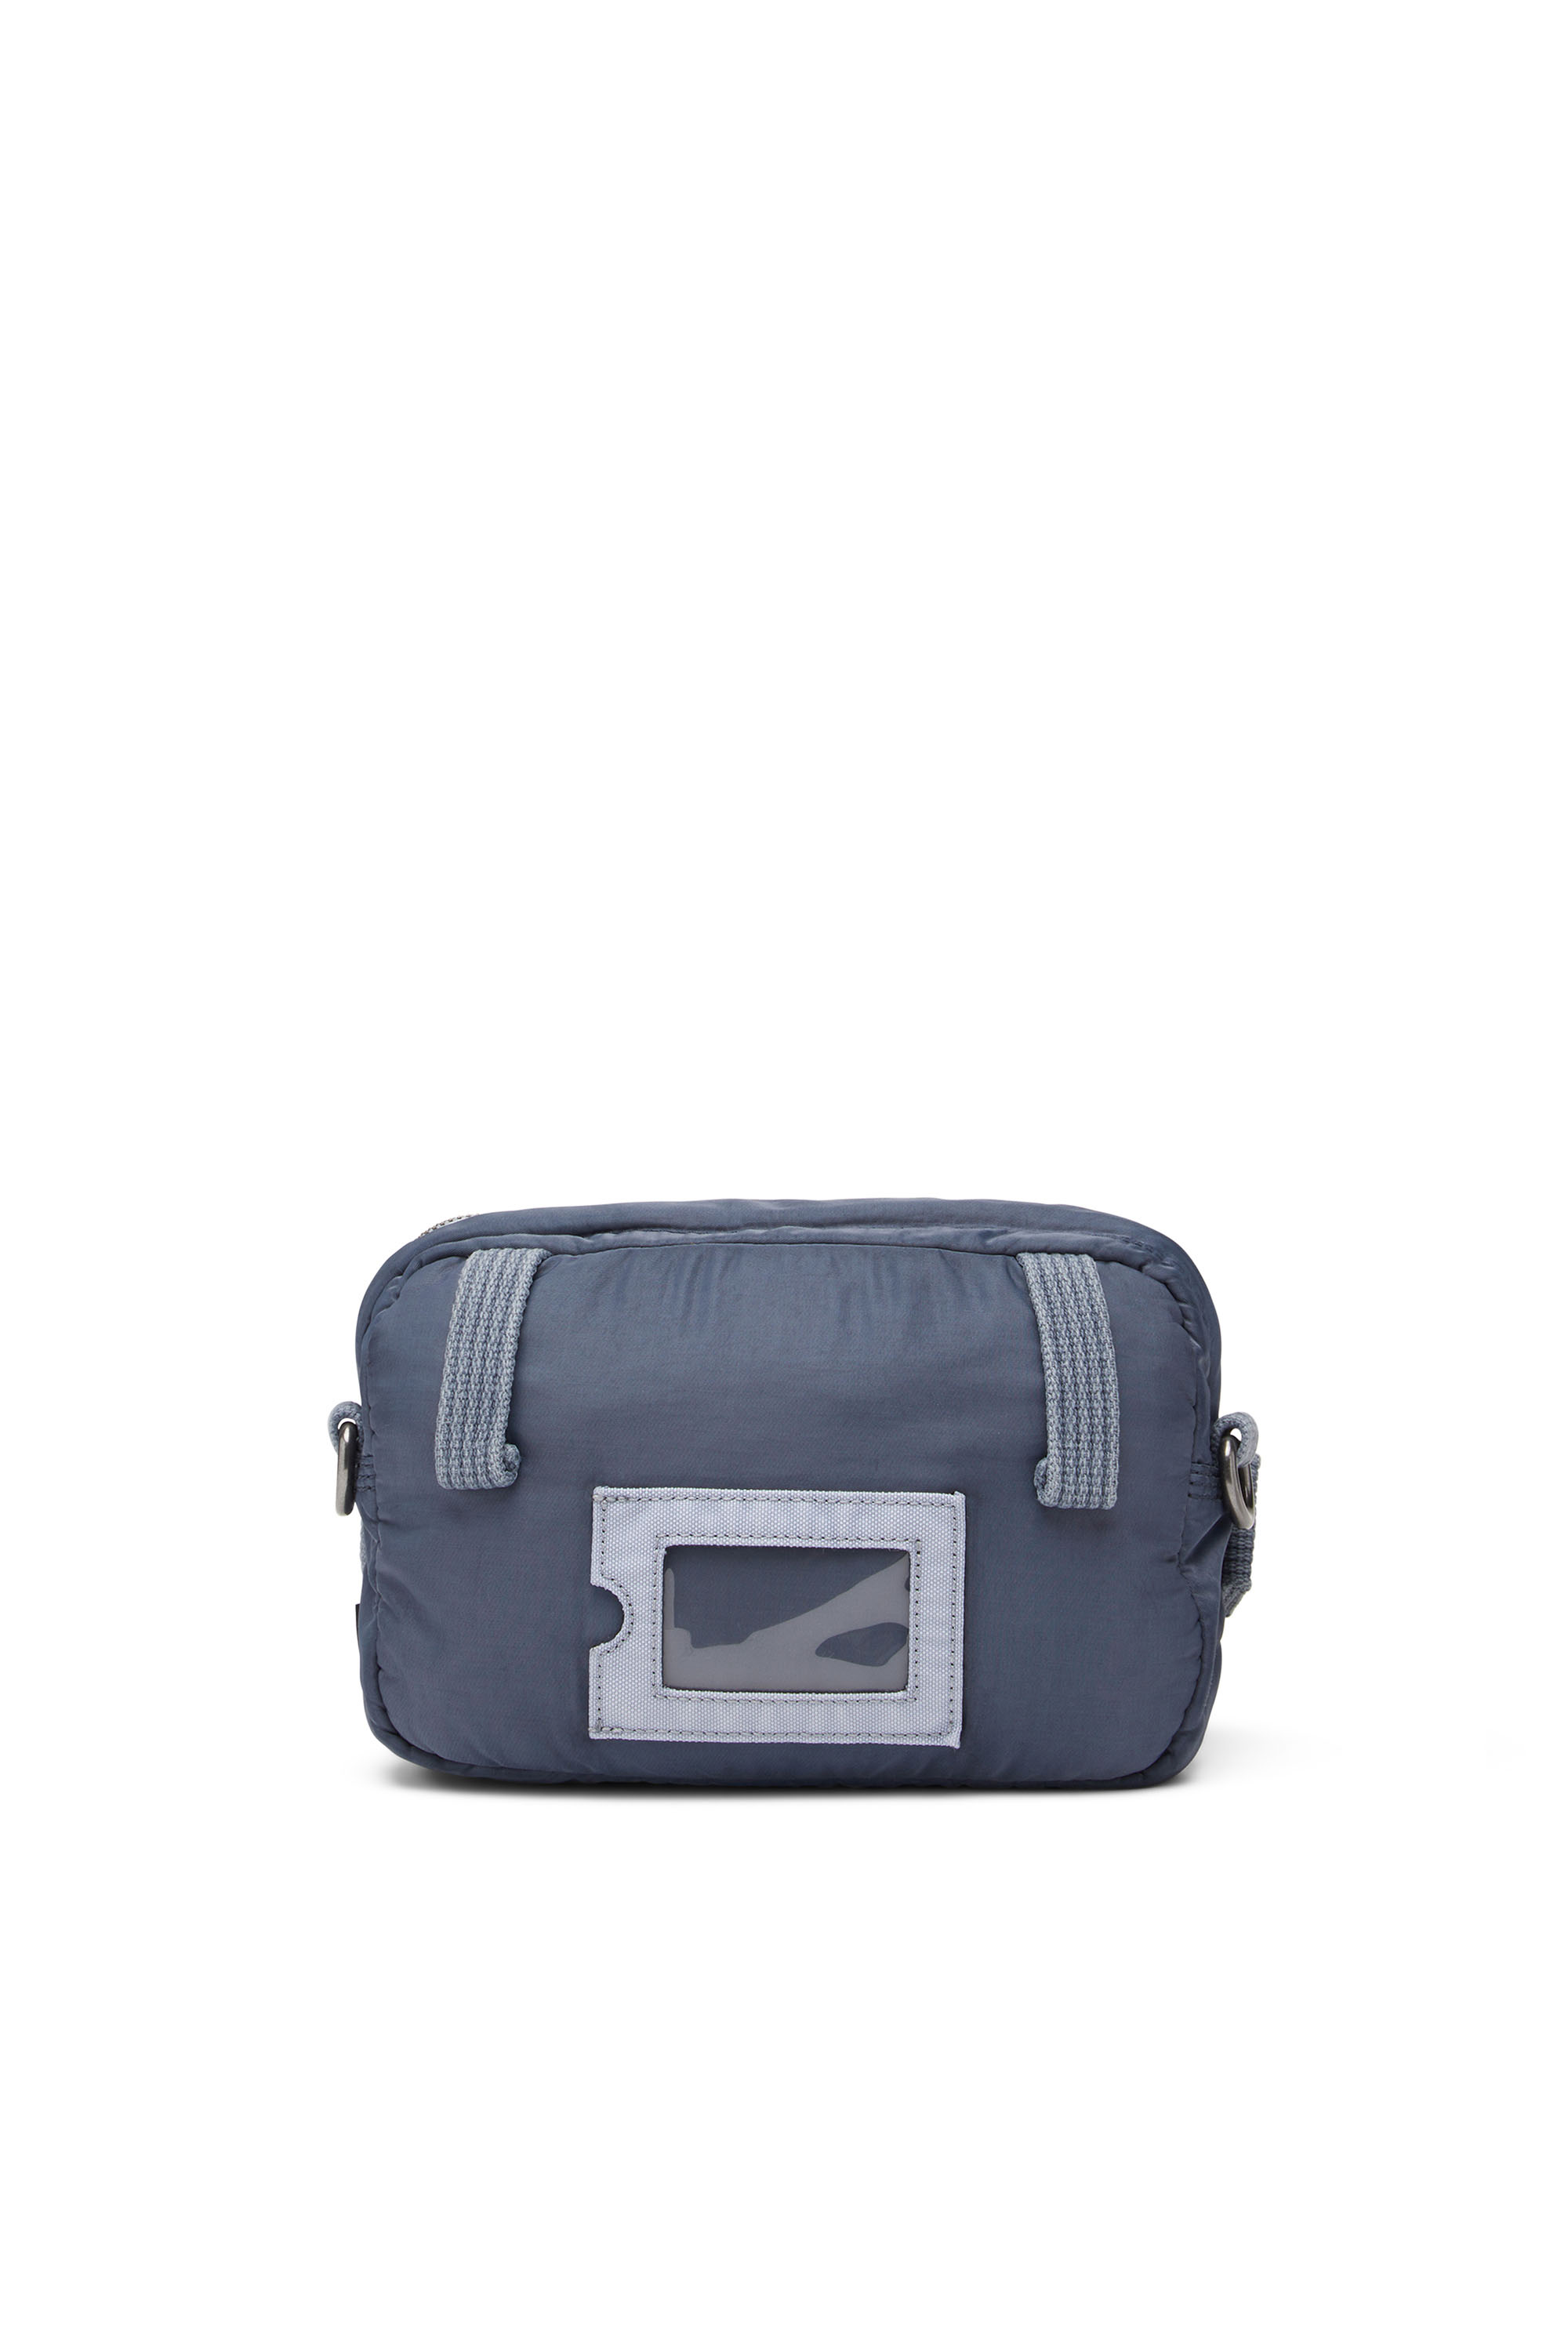 Men's Accessories: Crossbody Bags | Discover on Diesel.com